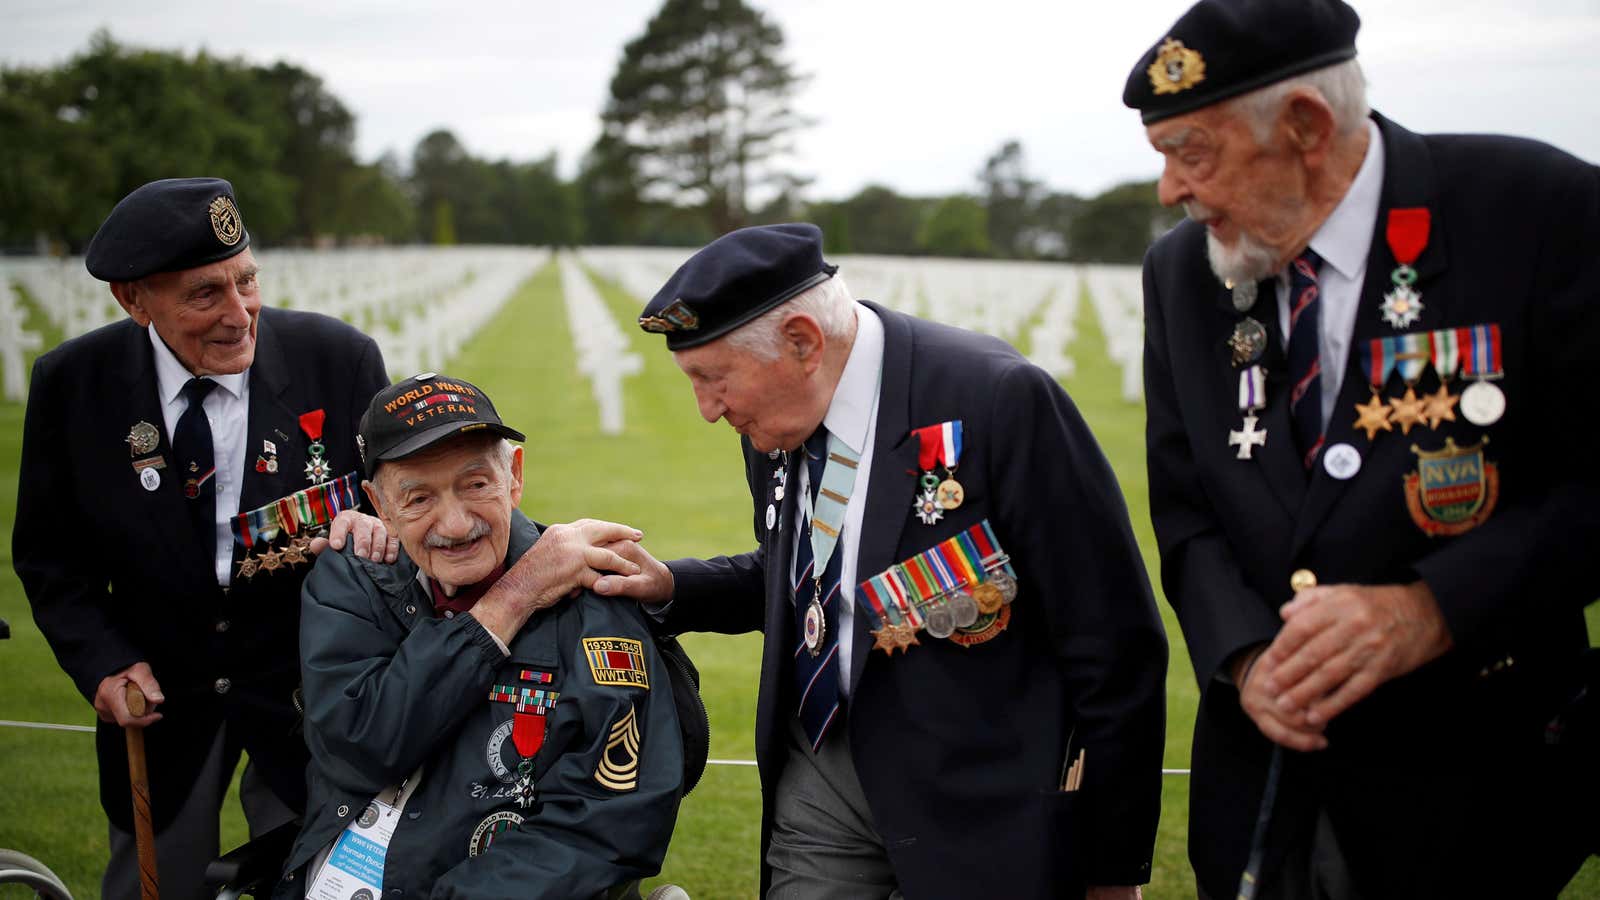 D-Day veterans, including Richard Llewellyn and Mervyn Kersh from Britain and Norman Duncan from the US, attend a ceremony near Omaha Beach on June 4.